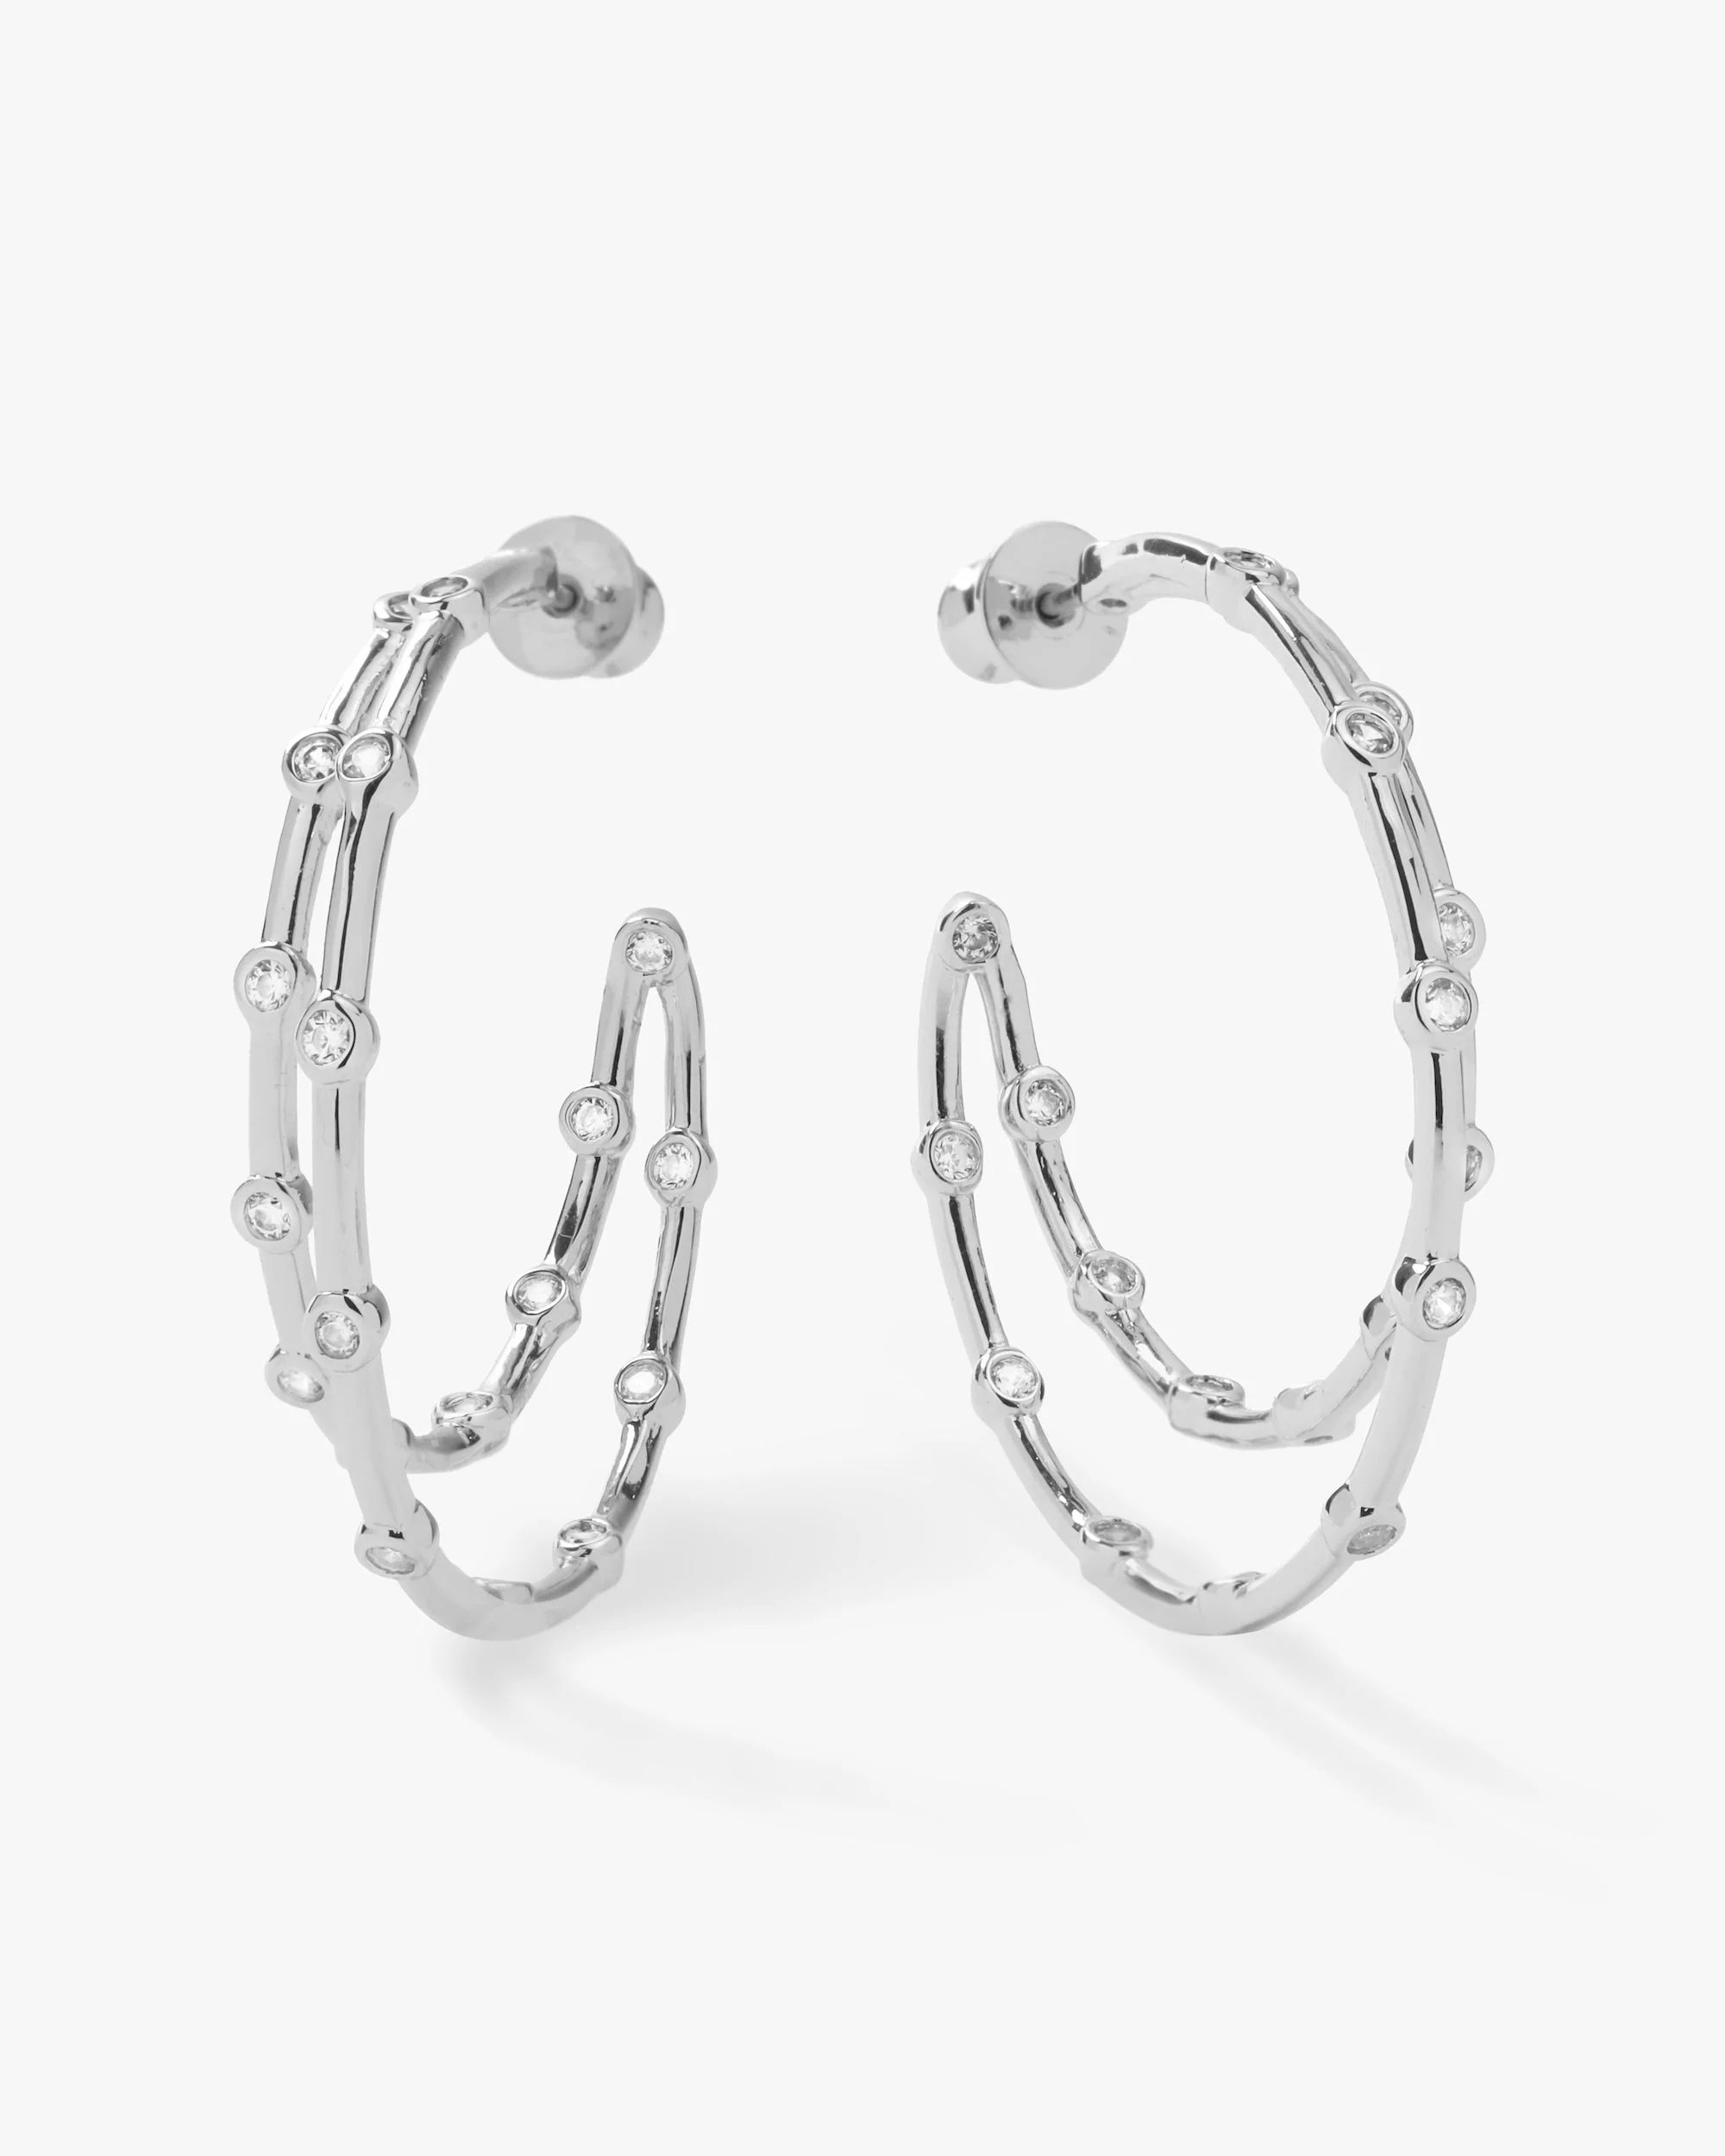 Big Ass Doubled Hoops 1.5" - Silver|White Diamondettes | Melinda Maria